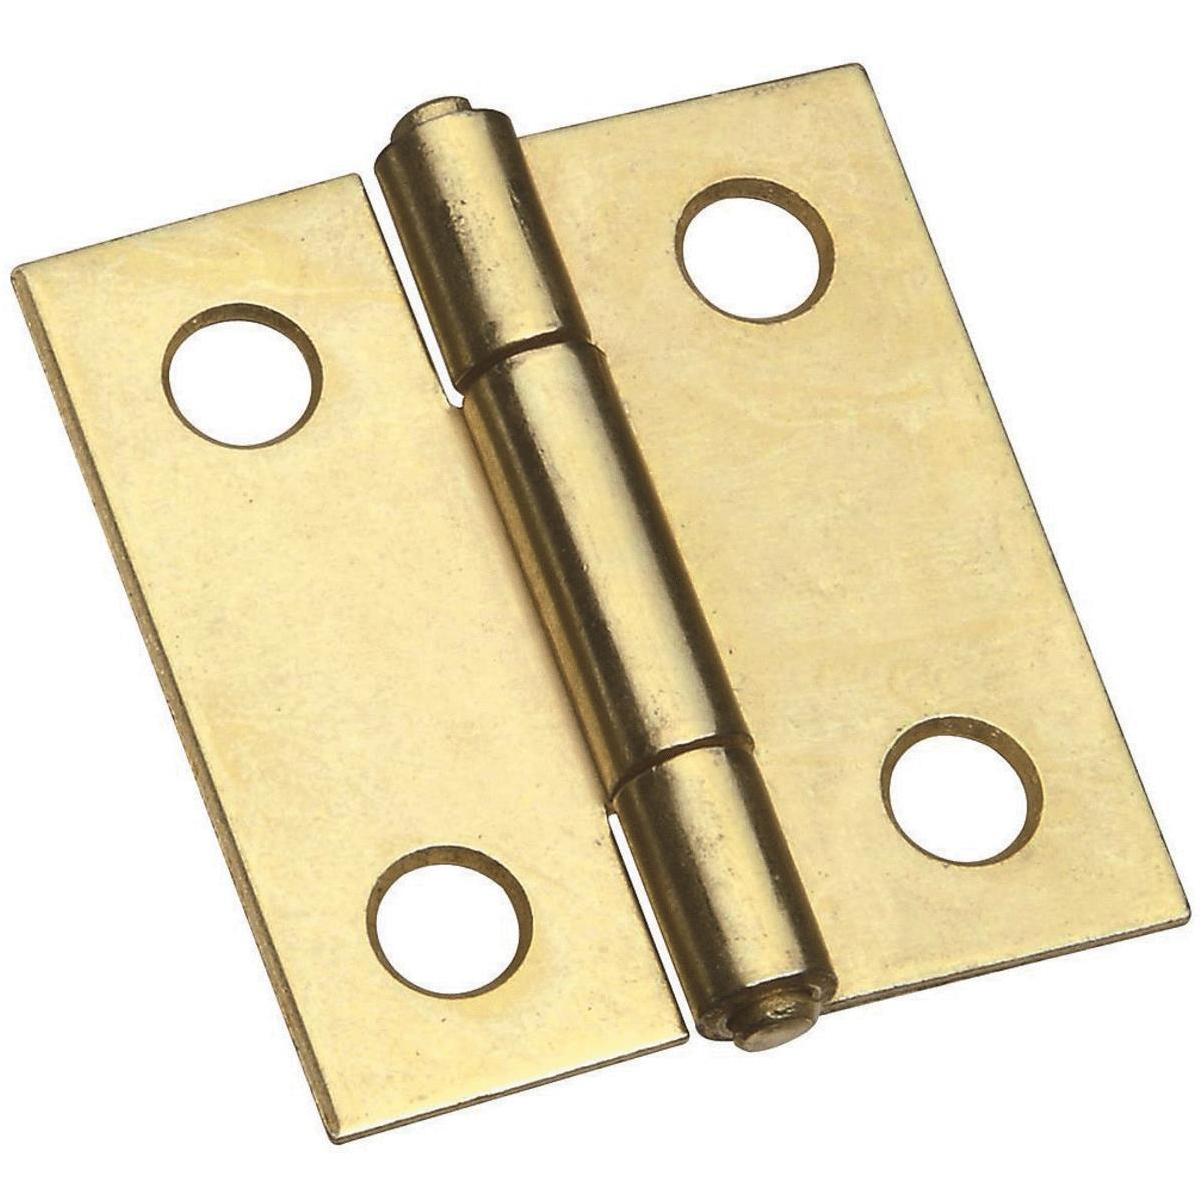 Non-Removable Pin Hinge - Stainless Steel N348-979